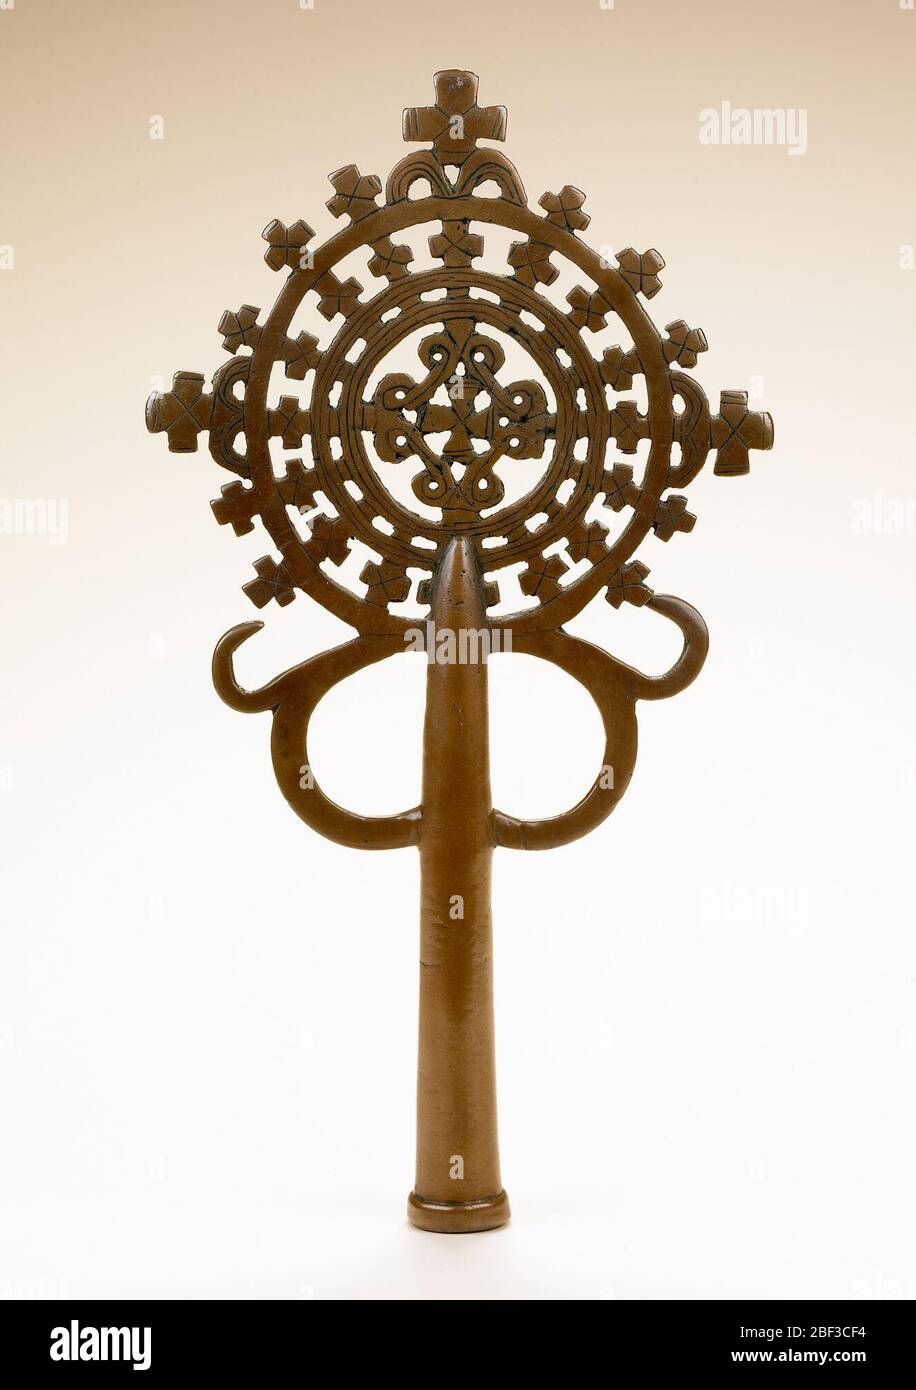 Processional cross. Christianity has a long history in Ethiopia, dating from its introduction in Aksum under the reign of King Azana in about A.D. 330. Stock Photo